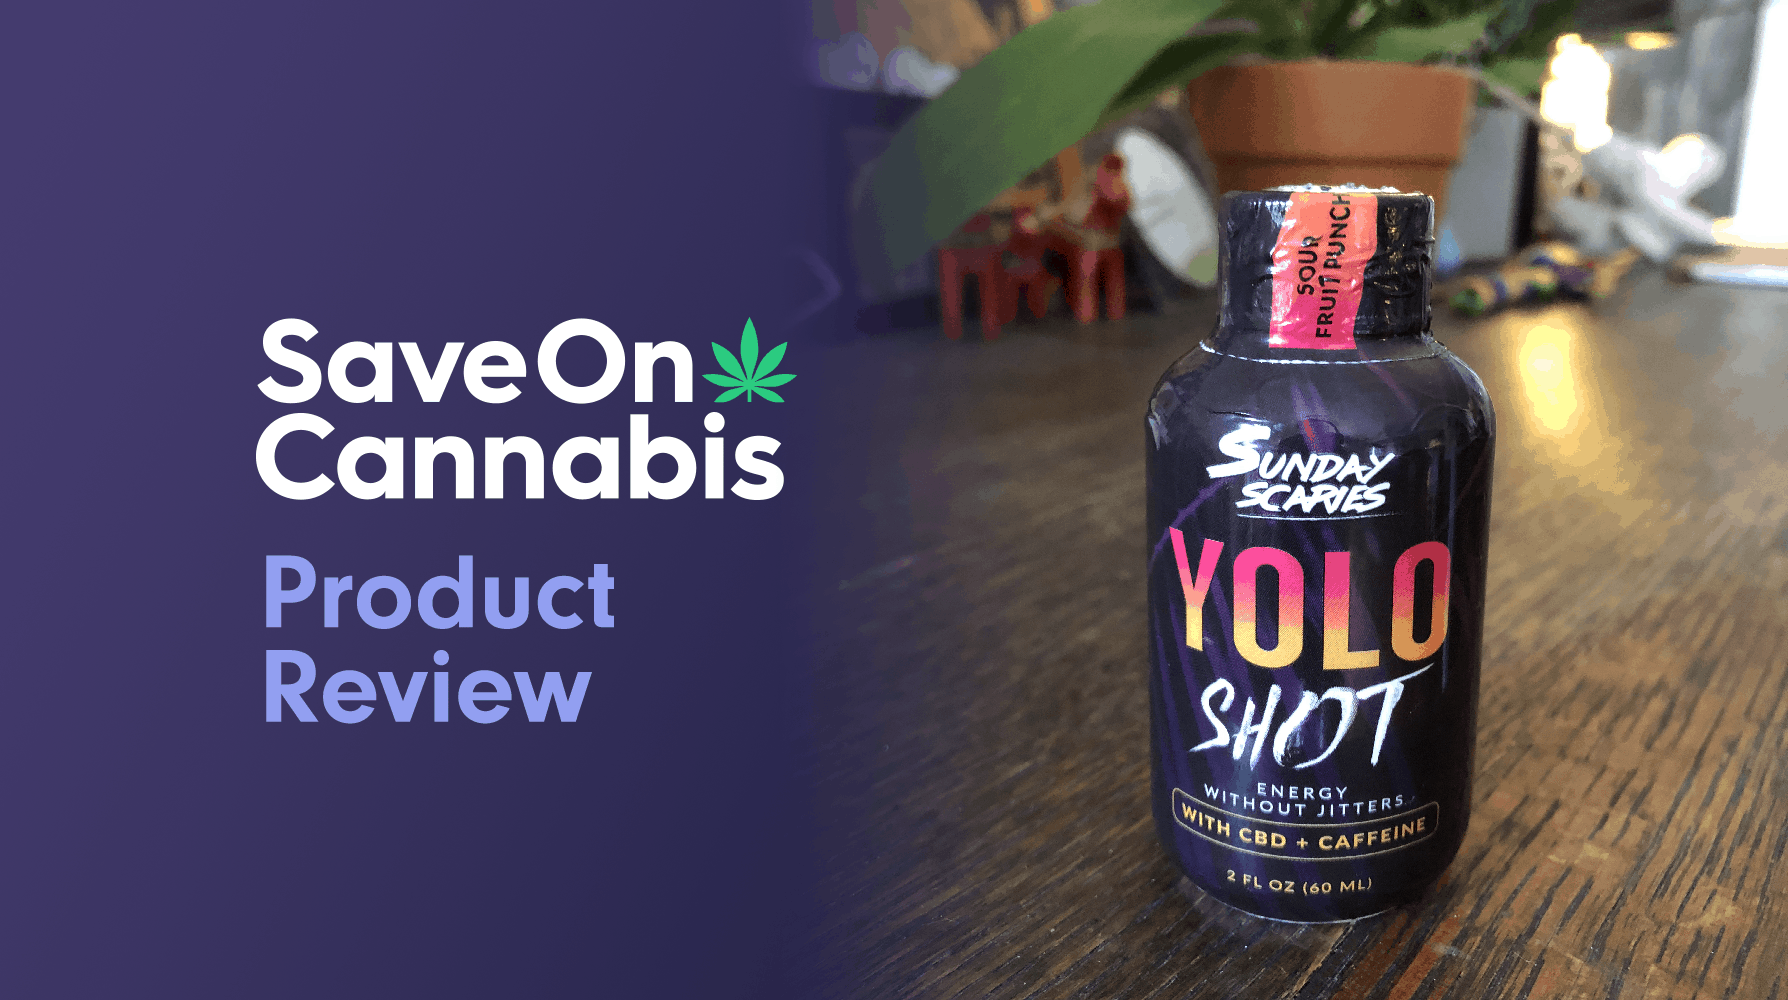 sunday scaries yolo shot sour fruit punch name save on cannabis website